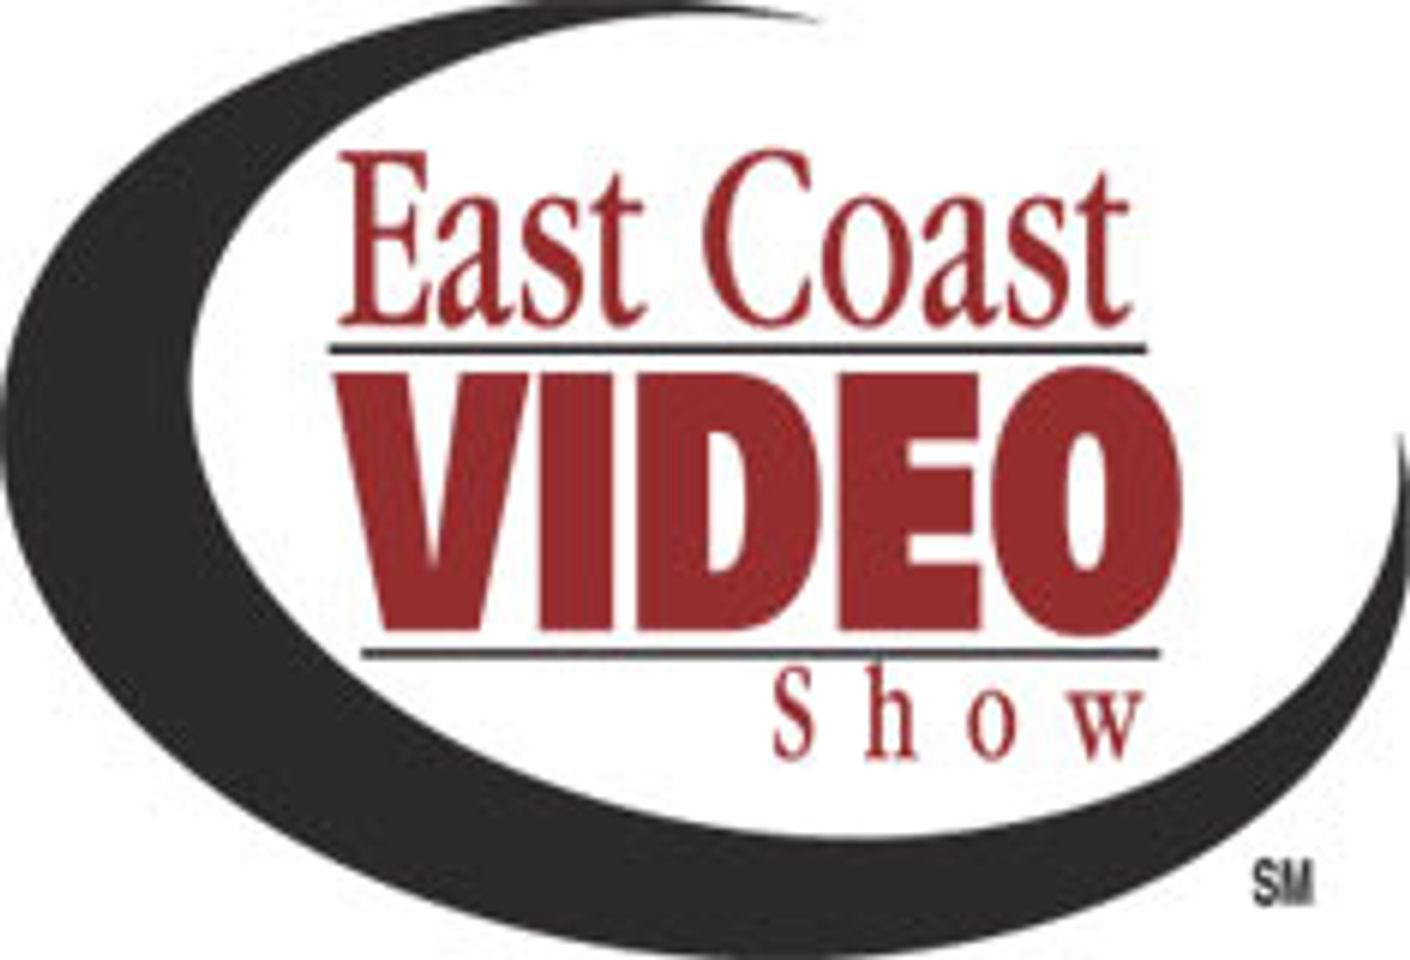 East Coast Video Show Opens Today